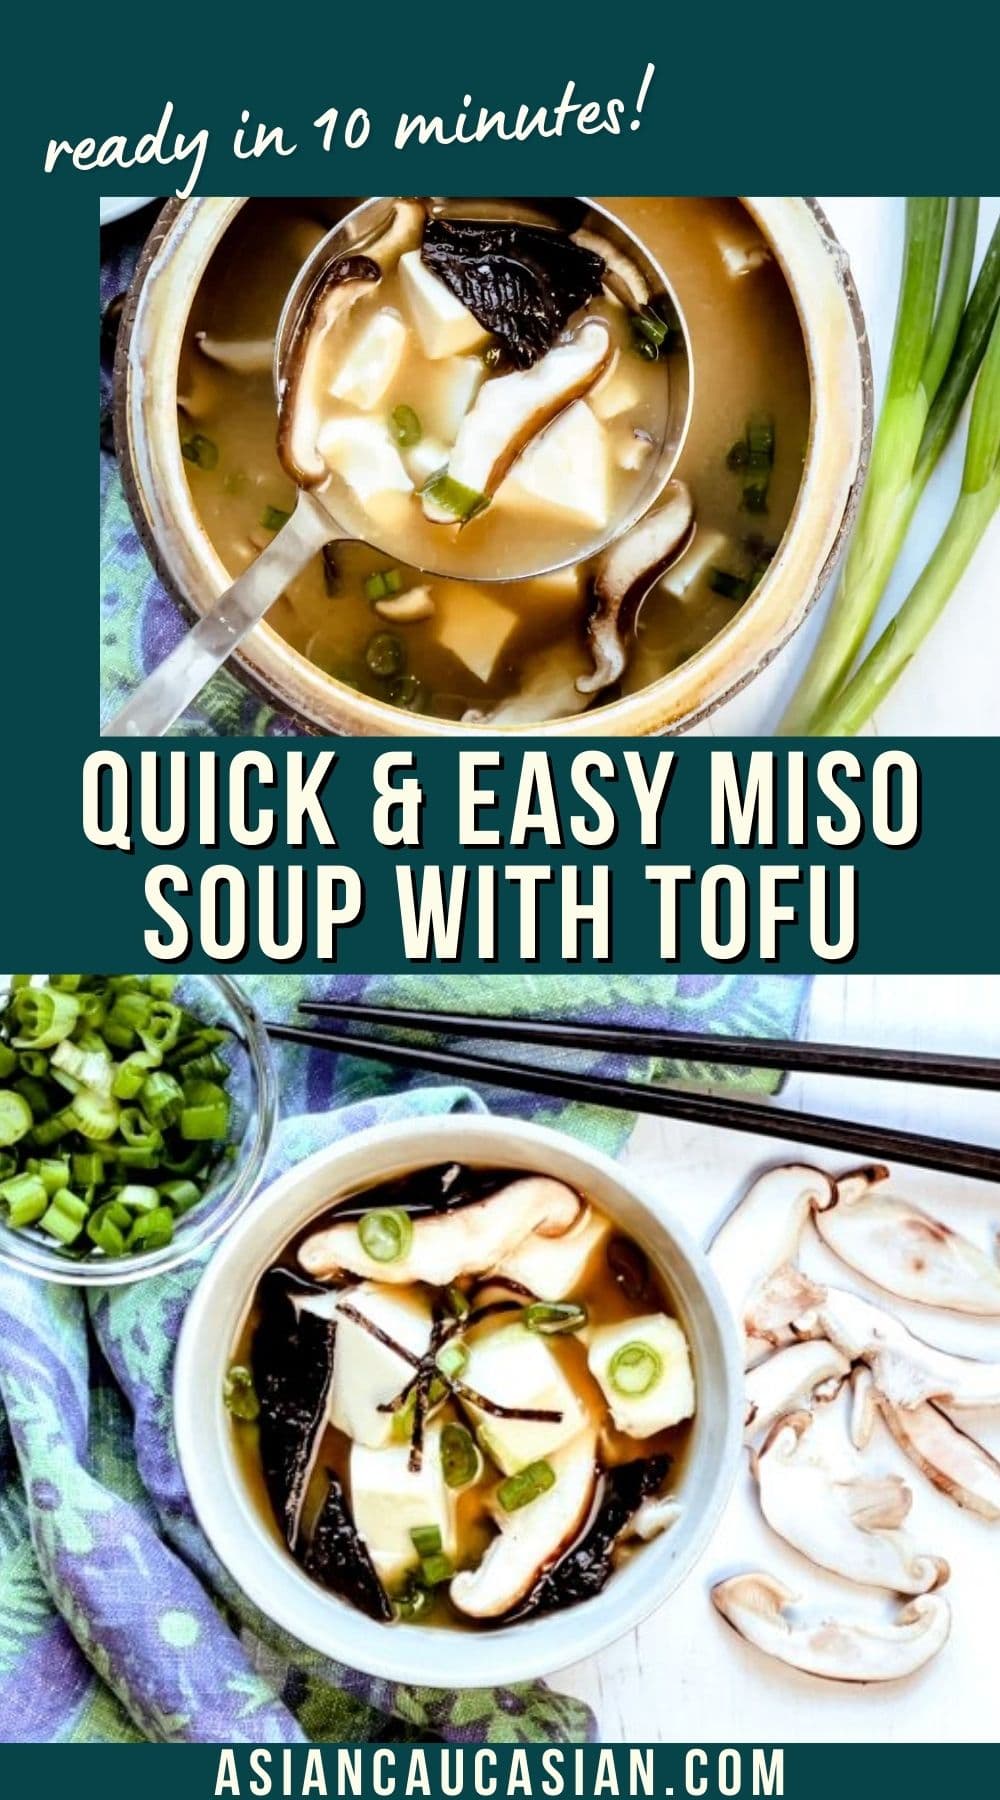 Two bowls filled with delicious miso soup with tofu with herbs and mushrooms on the side.